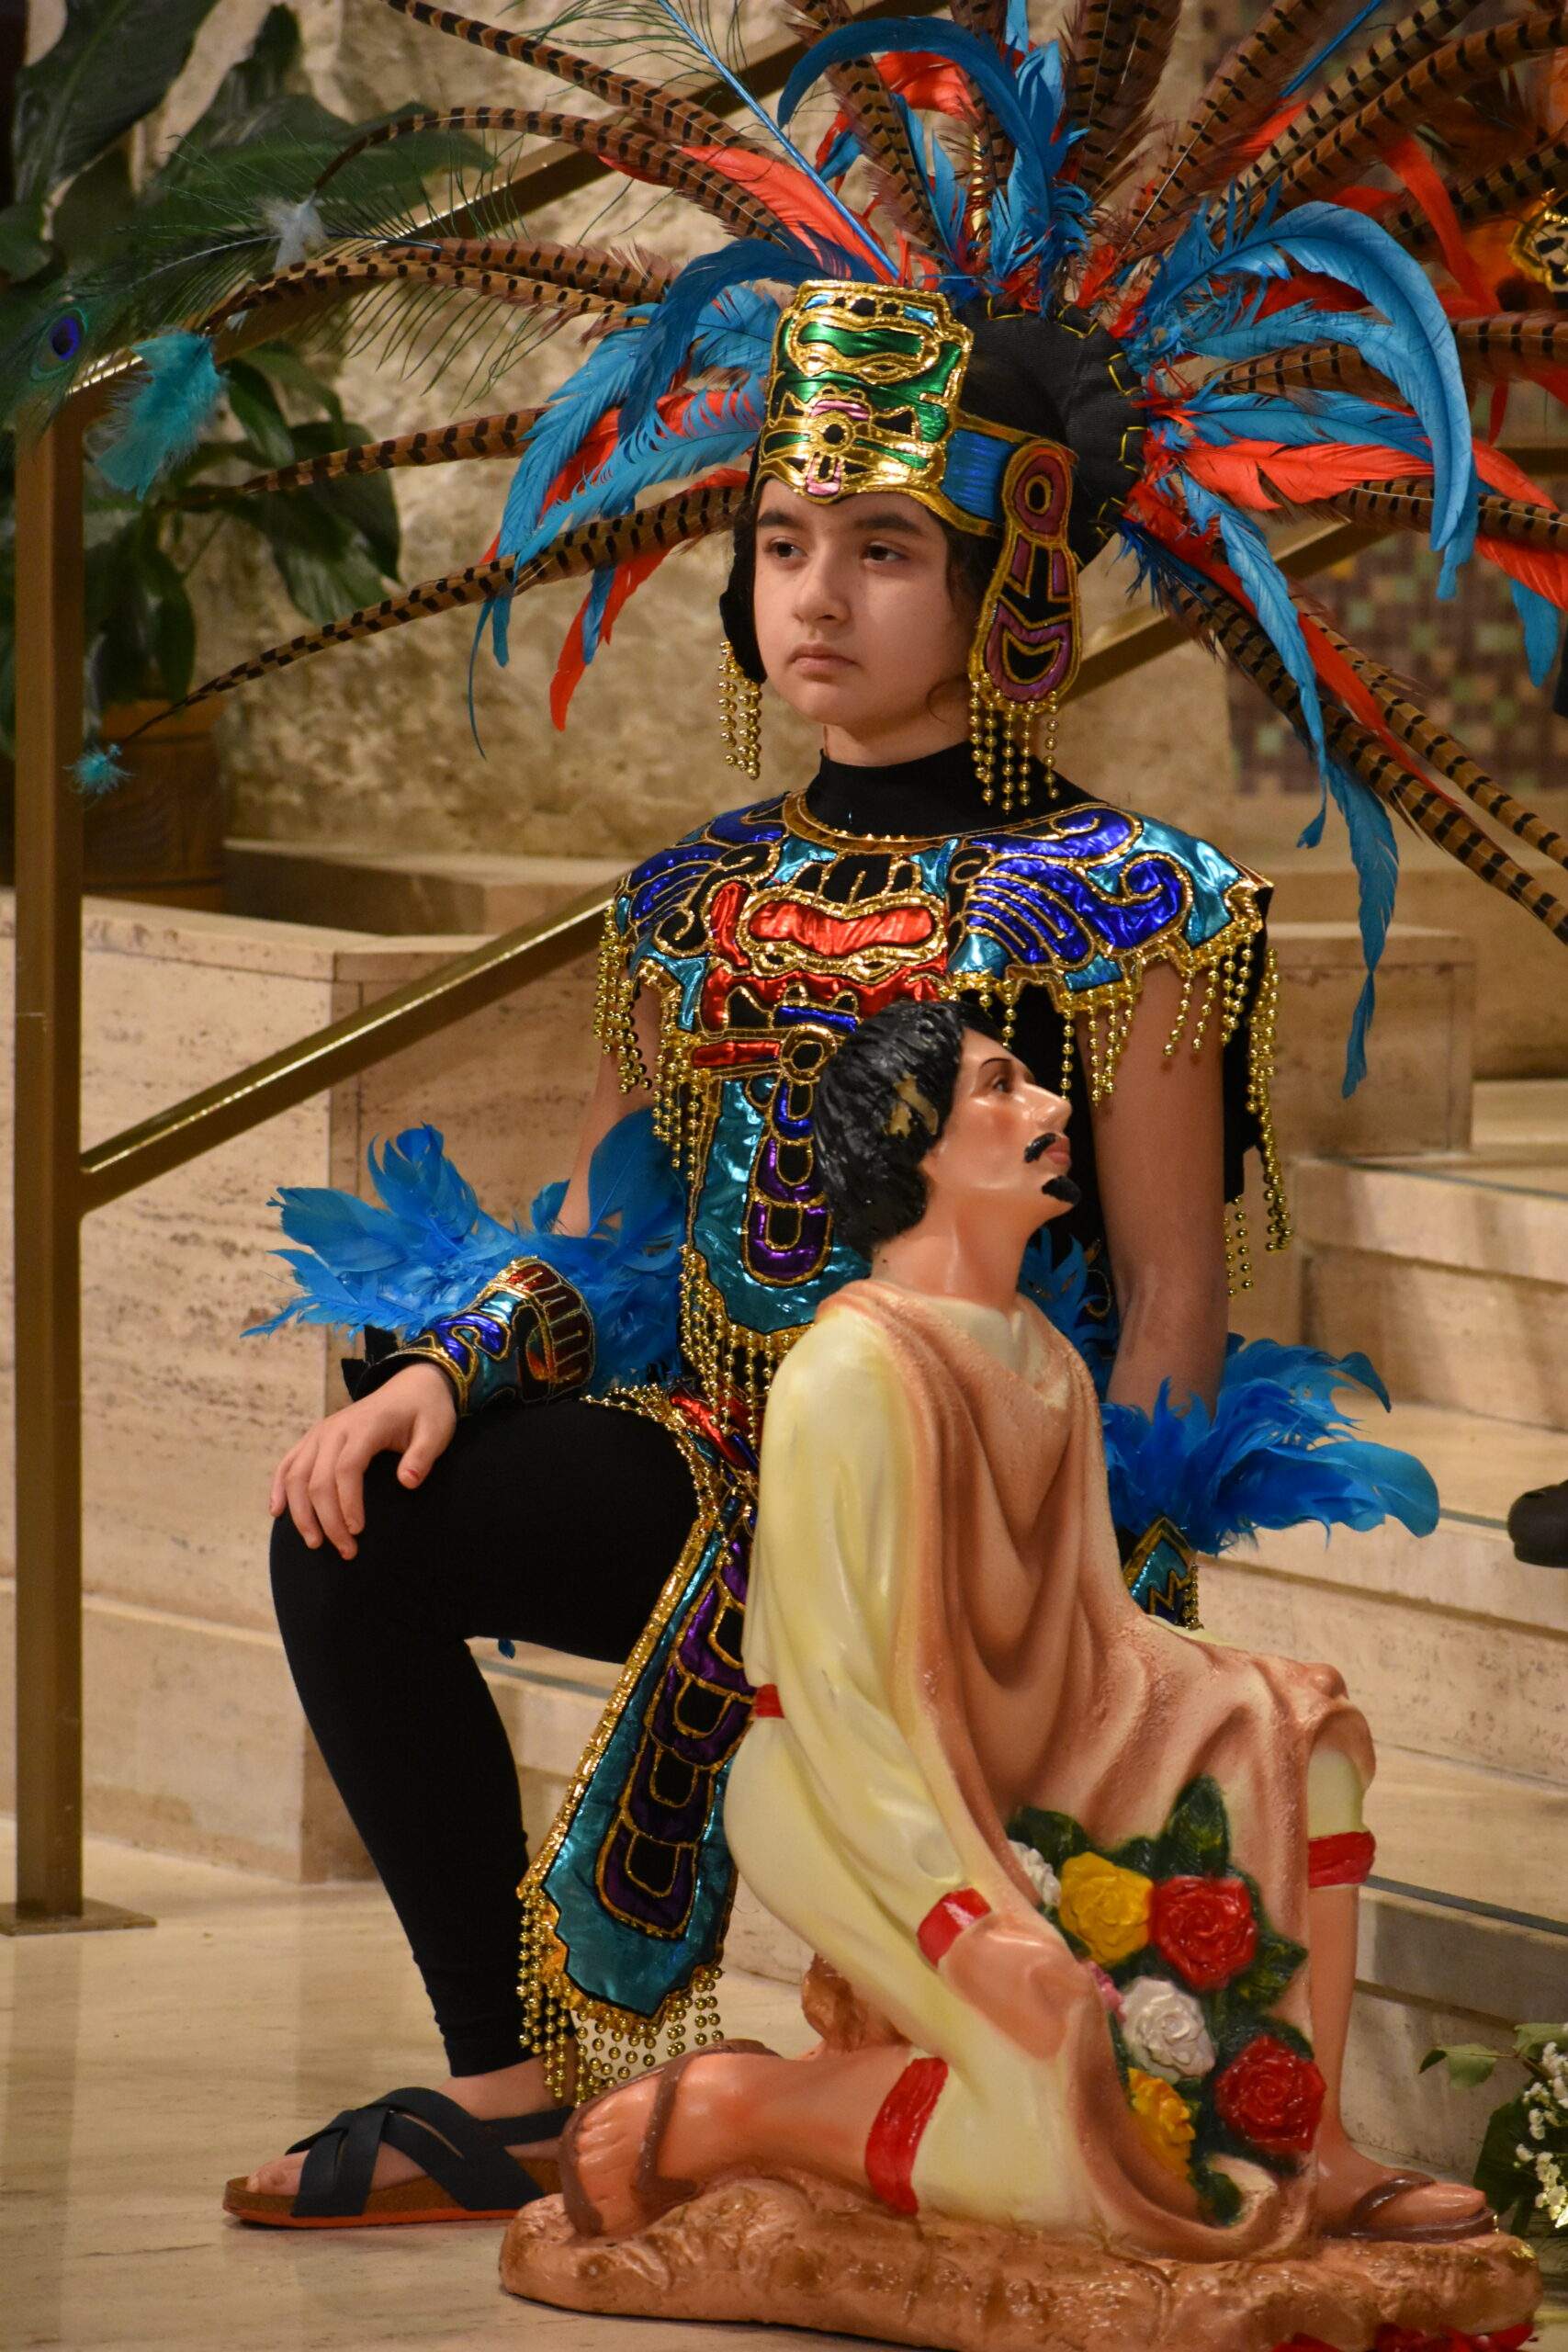 A young boy wearing a headdress participates in the Our Lady of Guadalupe reception performances.